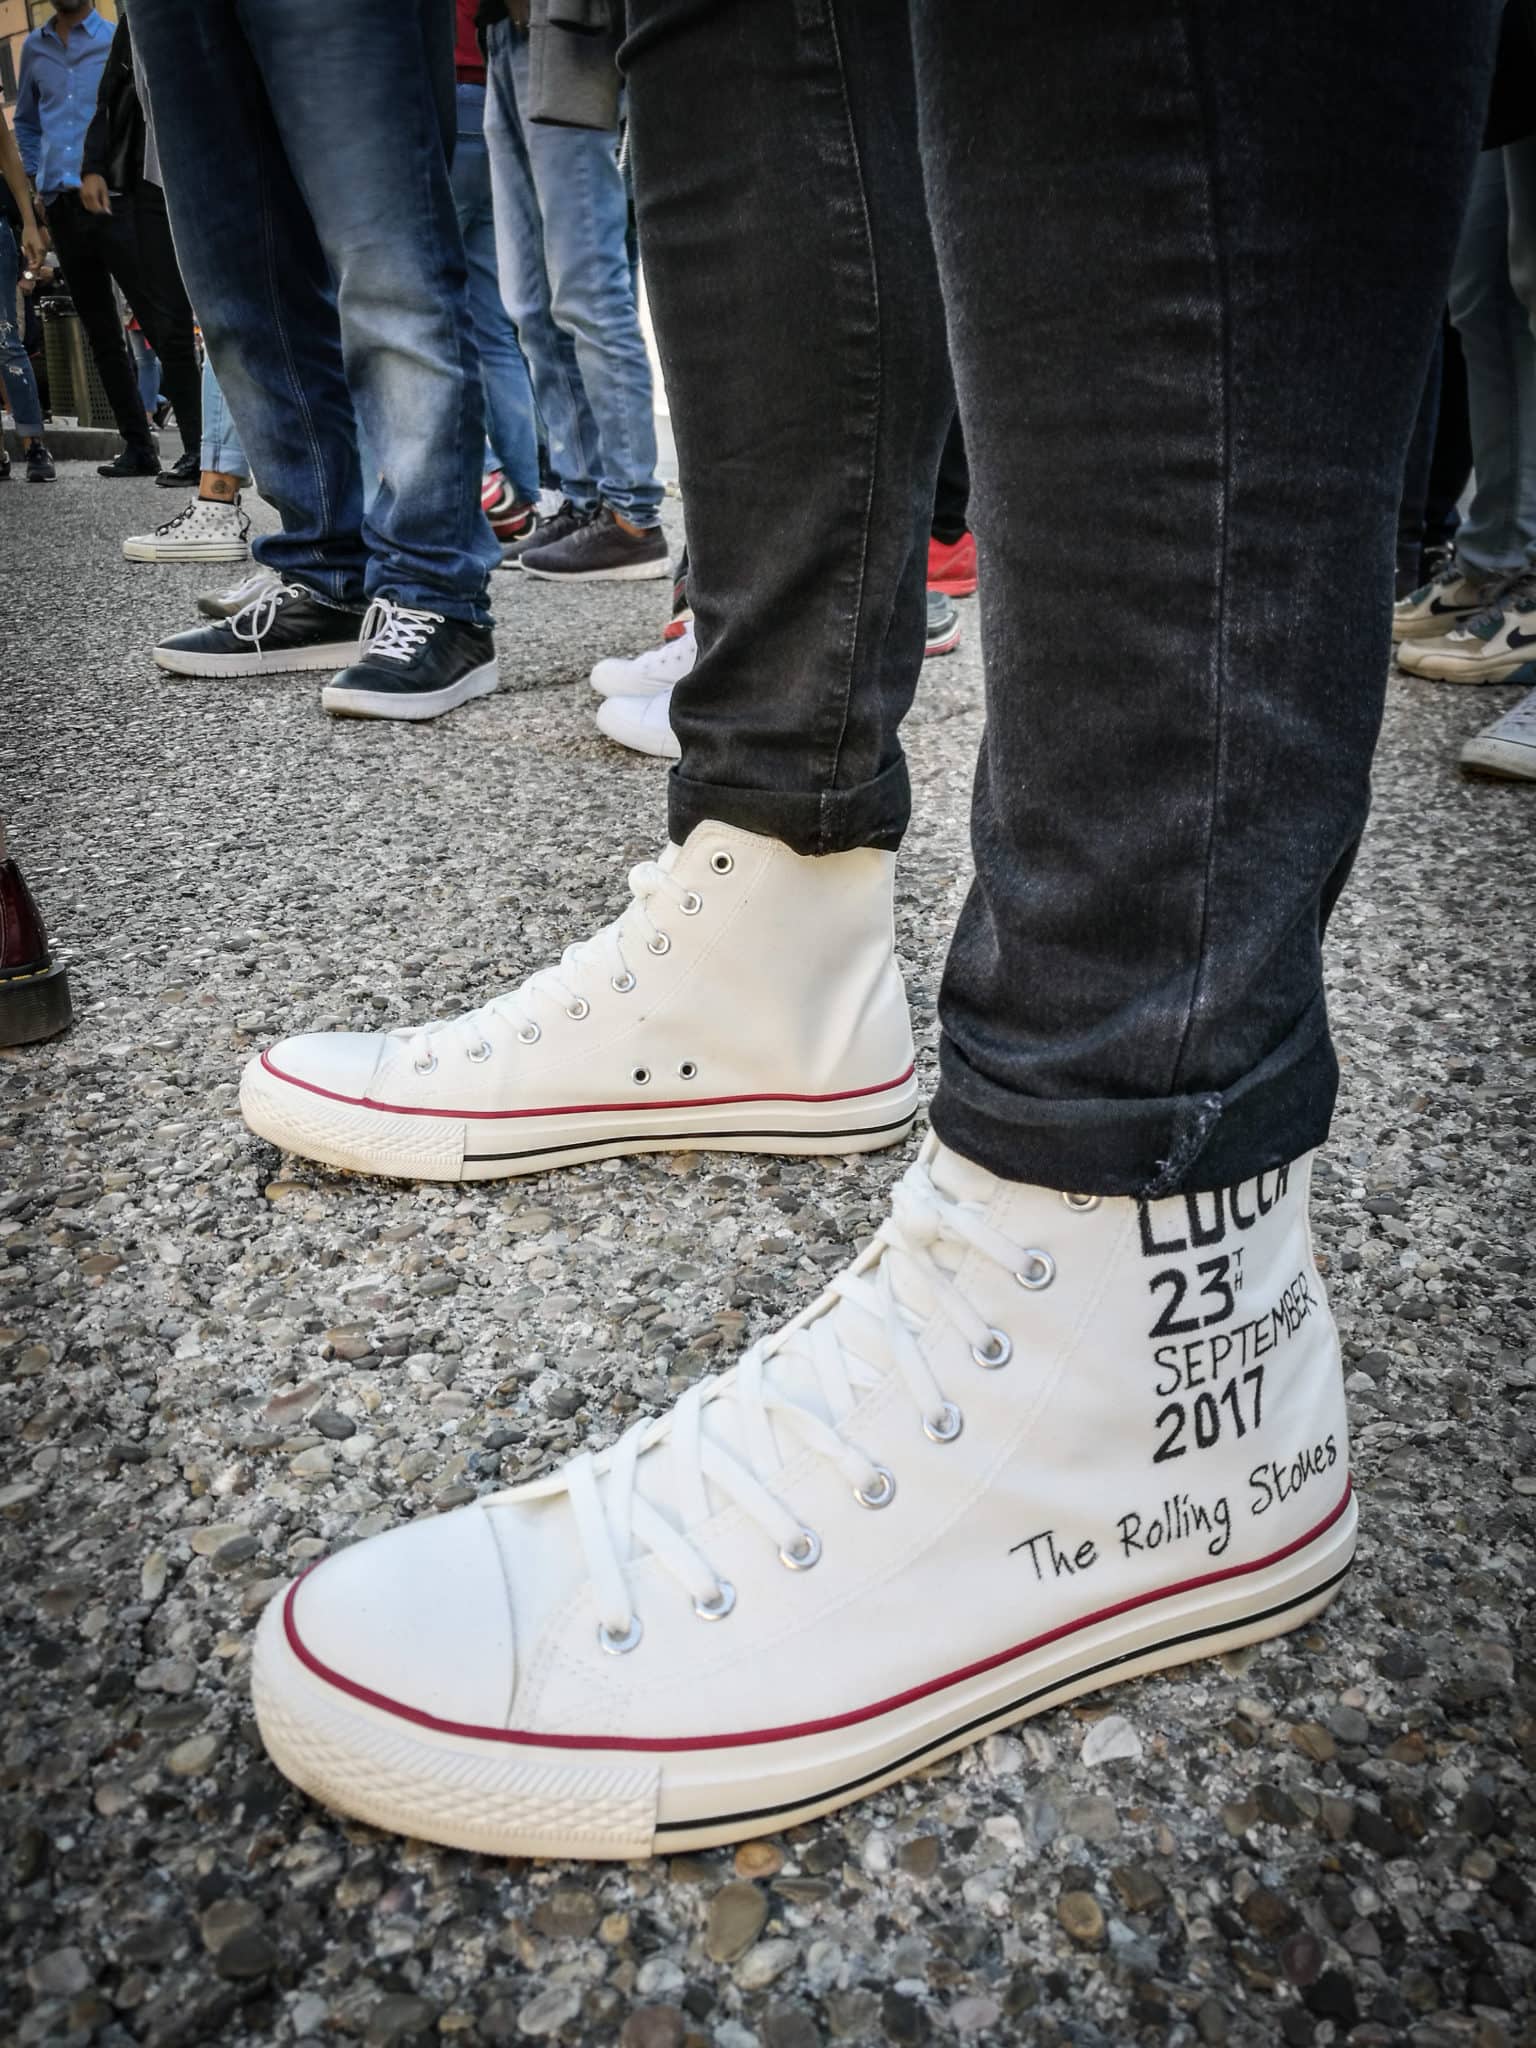 The Rolling Stones in Lucca Shoes